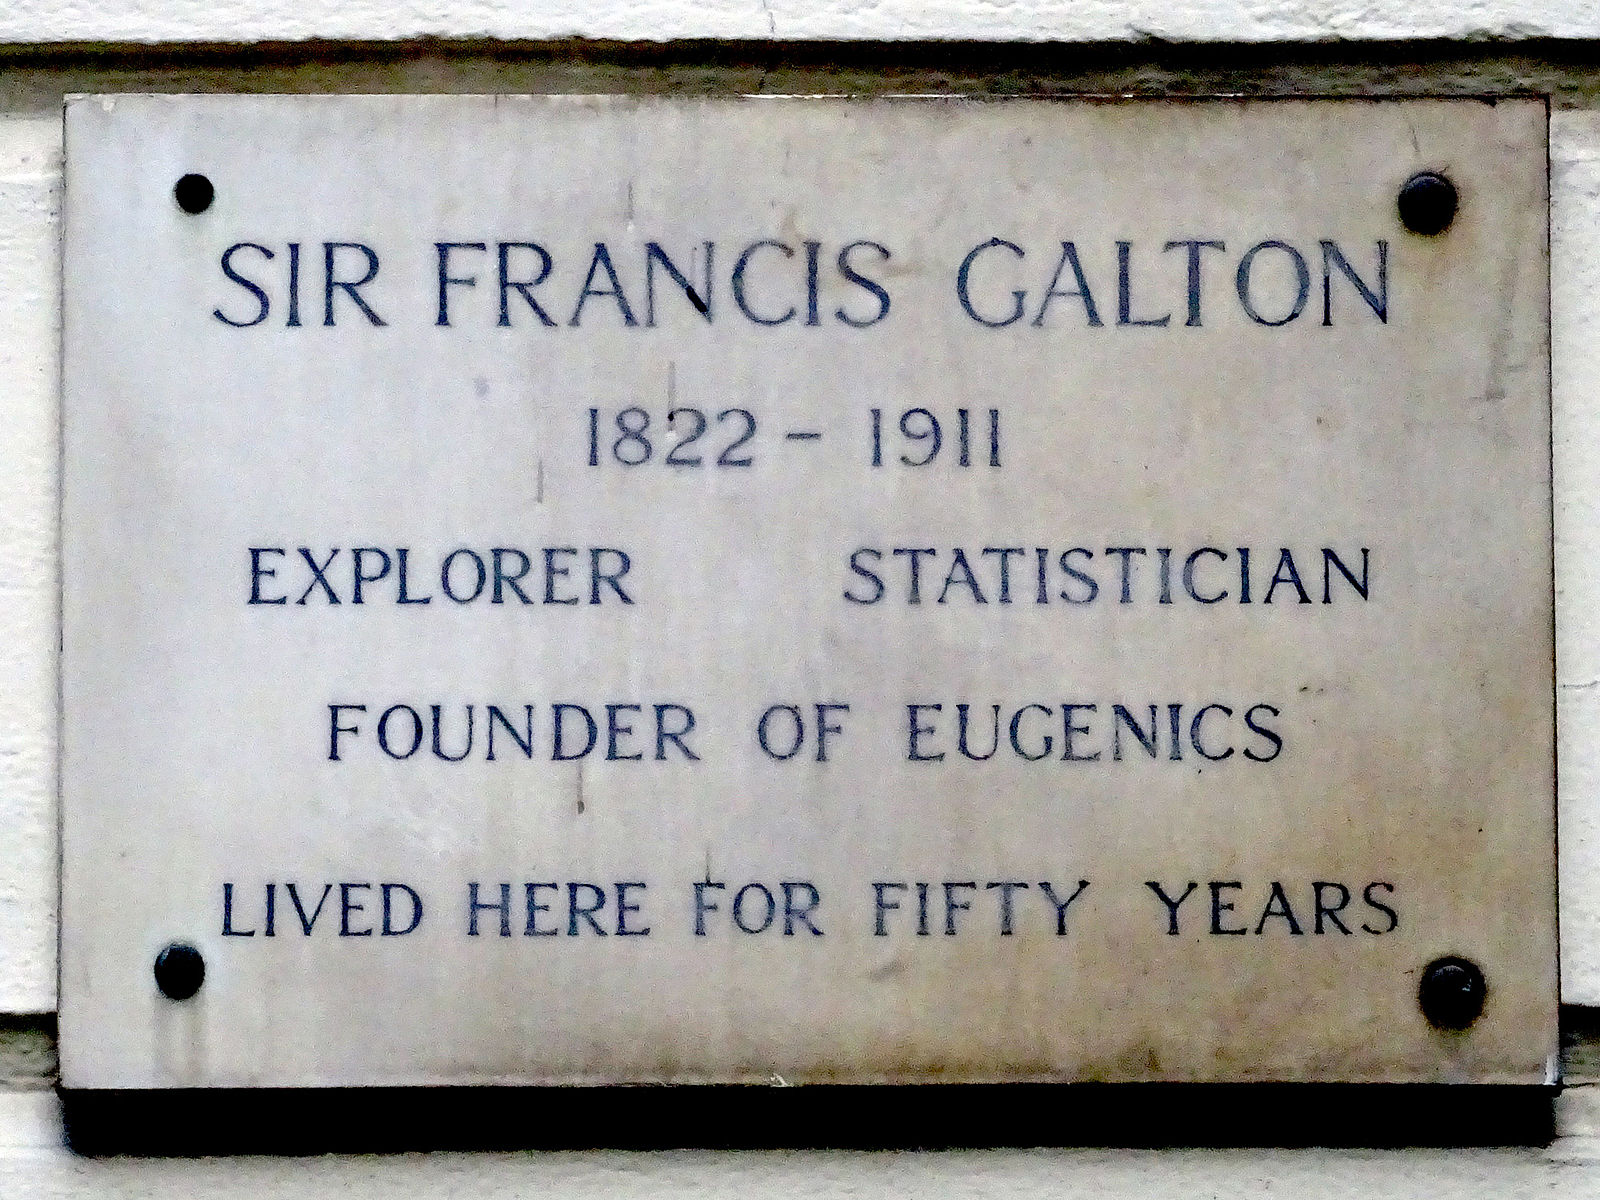 Image of Galton's gravesite listing him as the "founder of eugenics." 